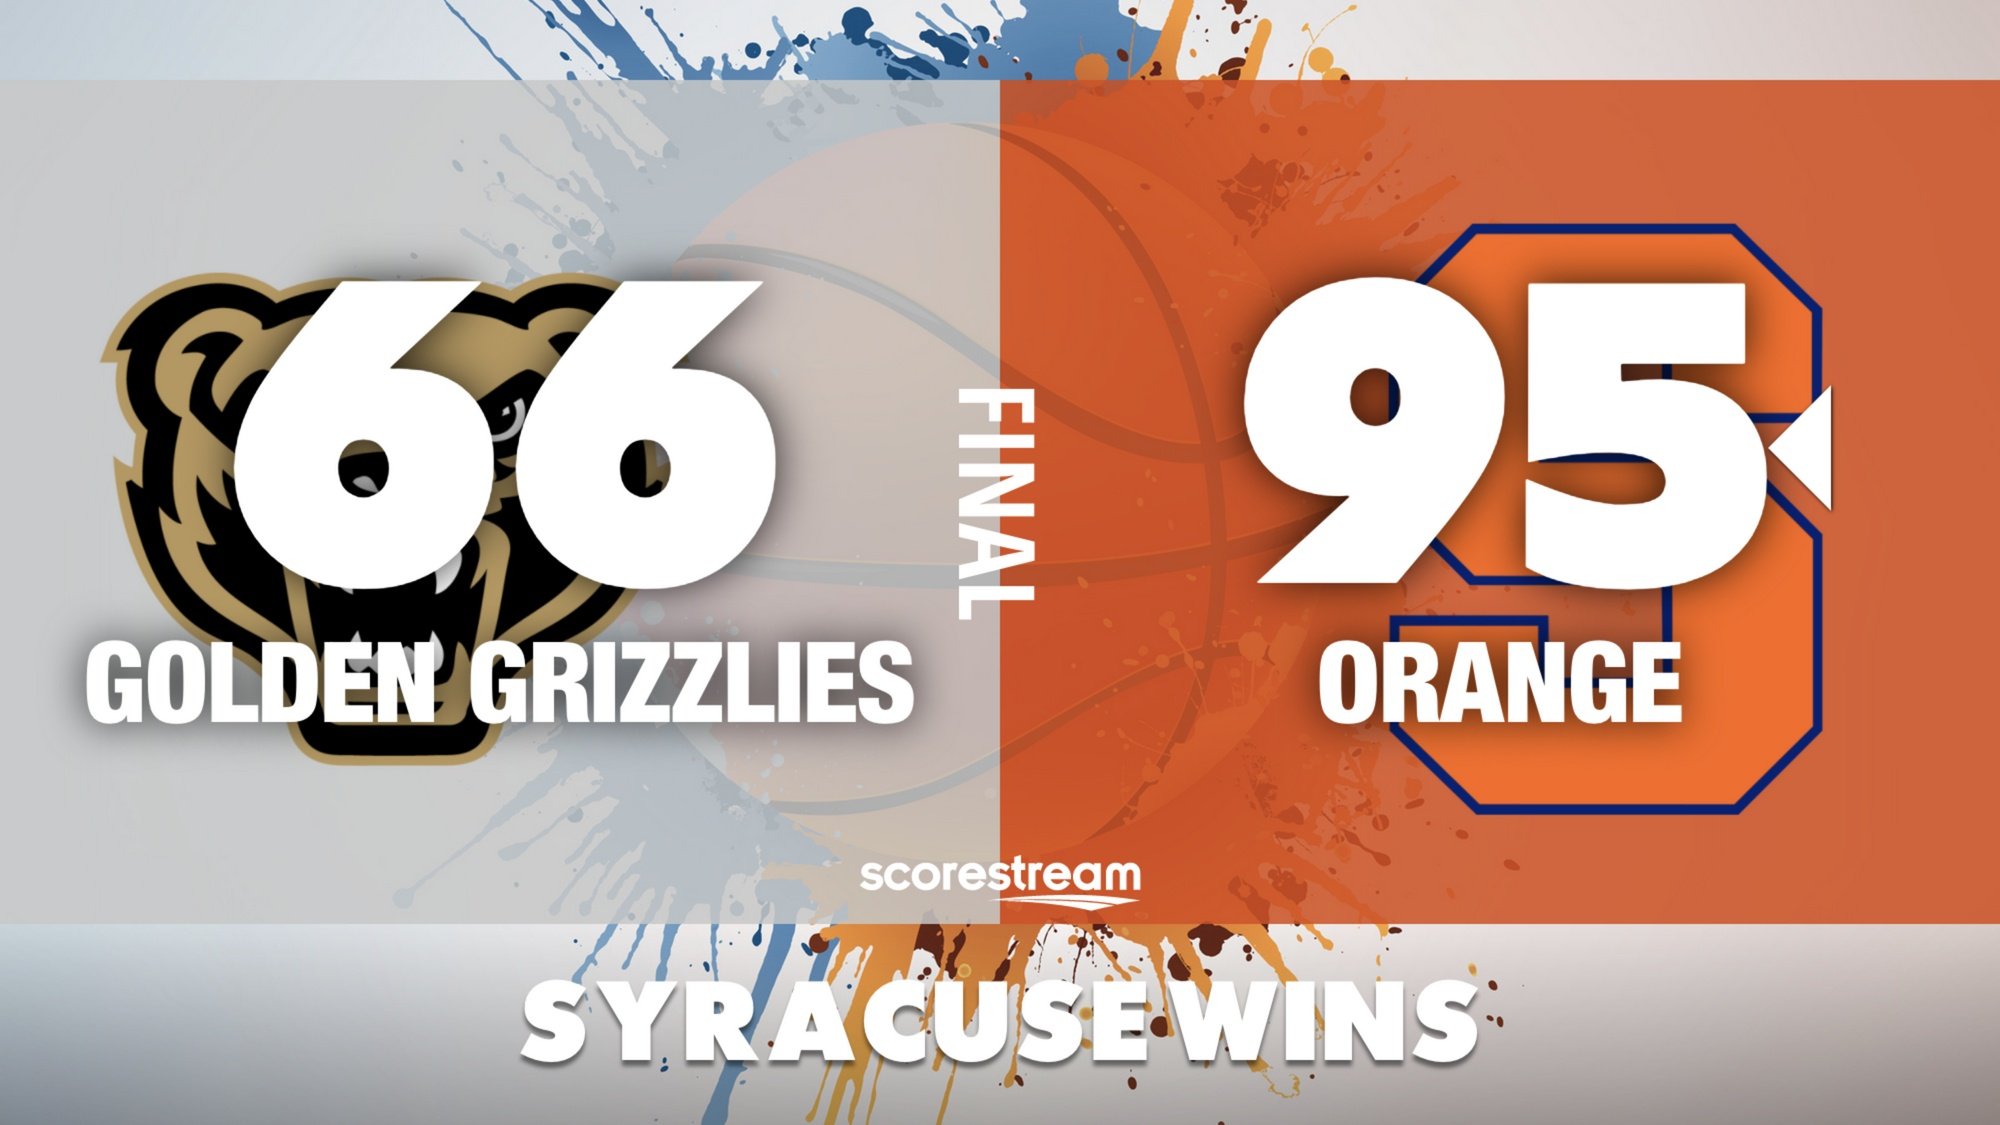 Syracuse defeated Oakland easily in a college basketball game.